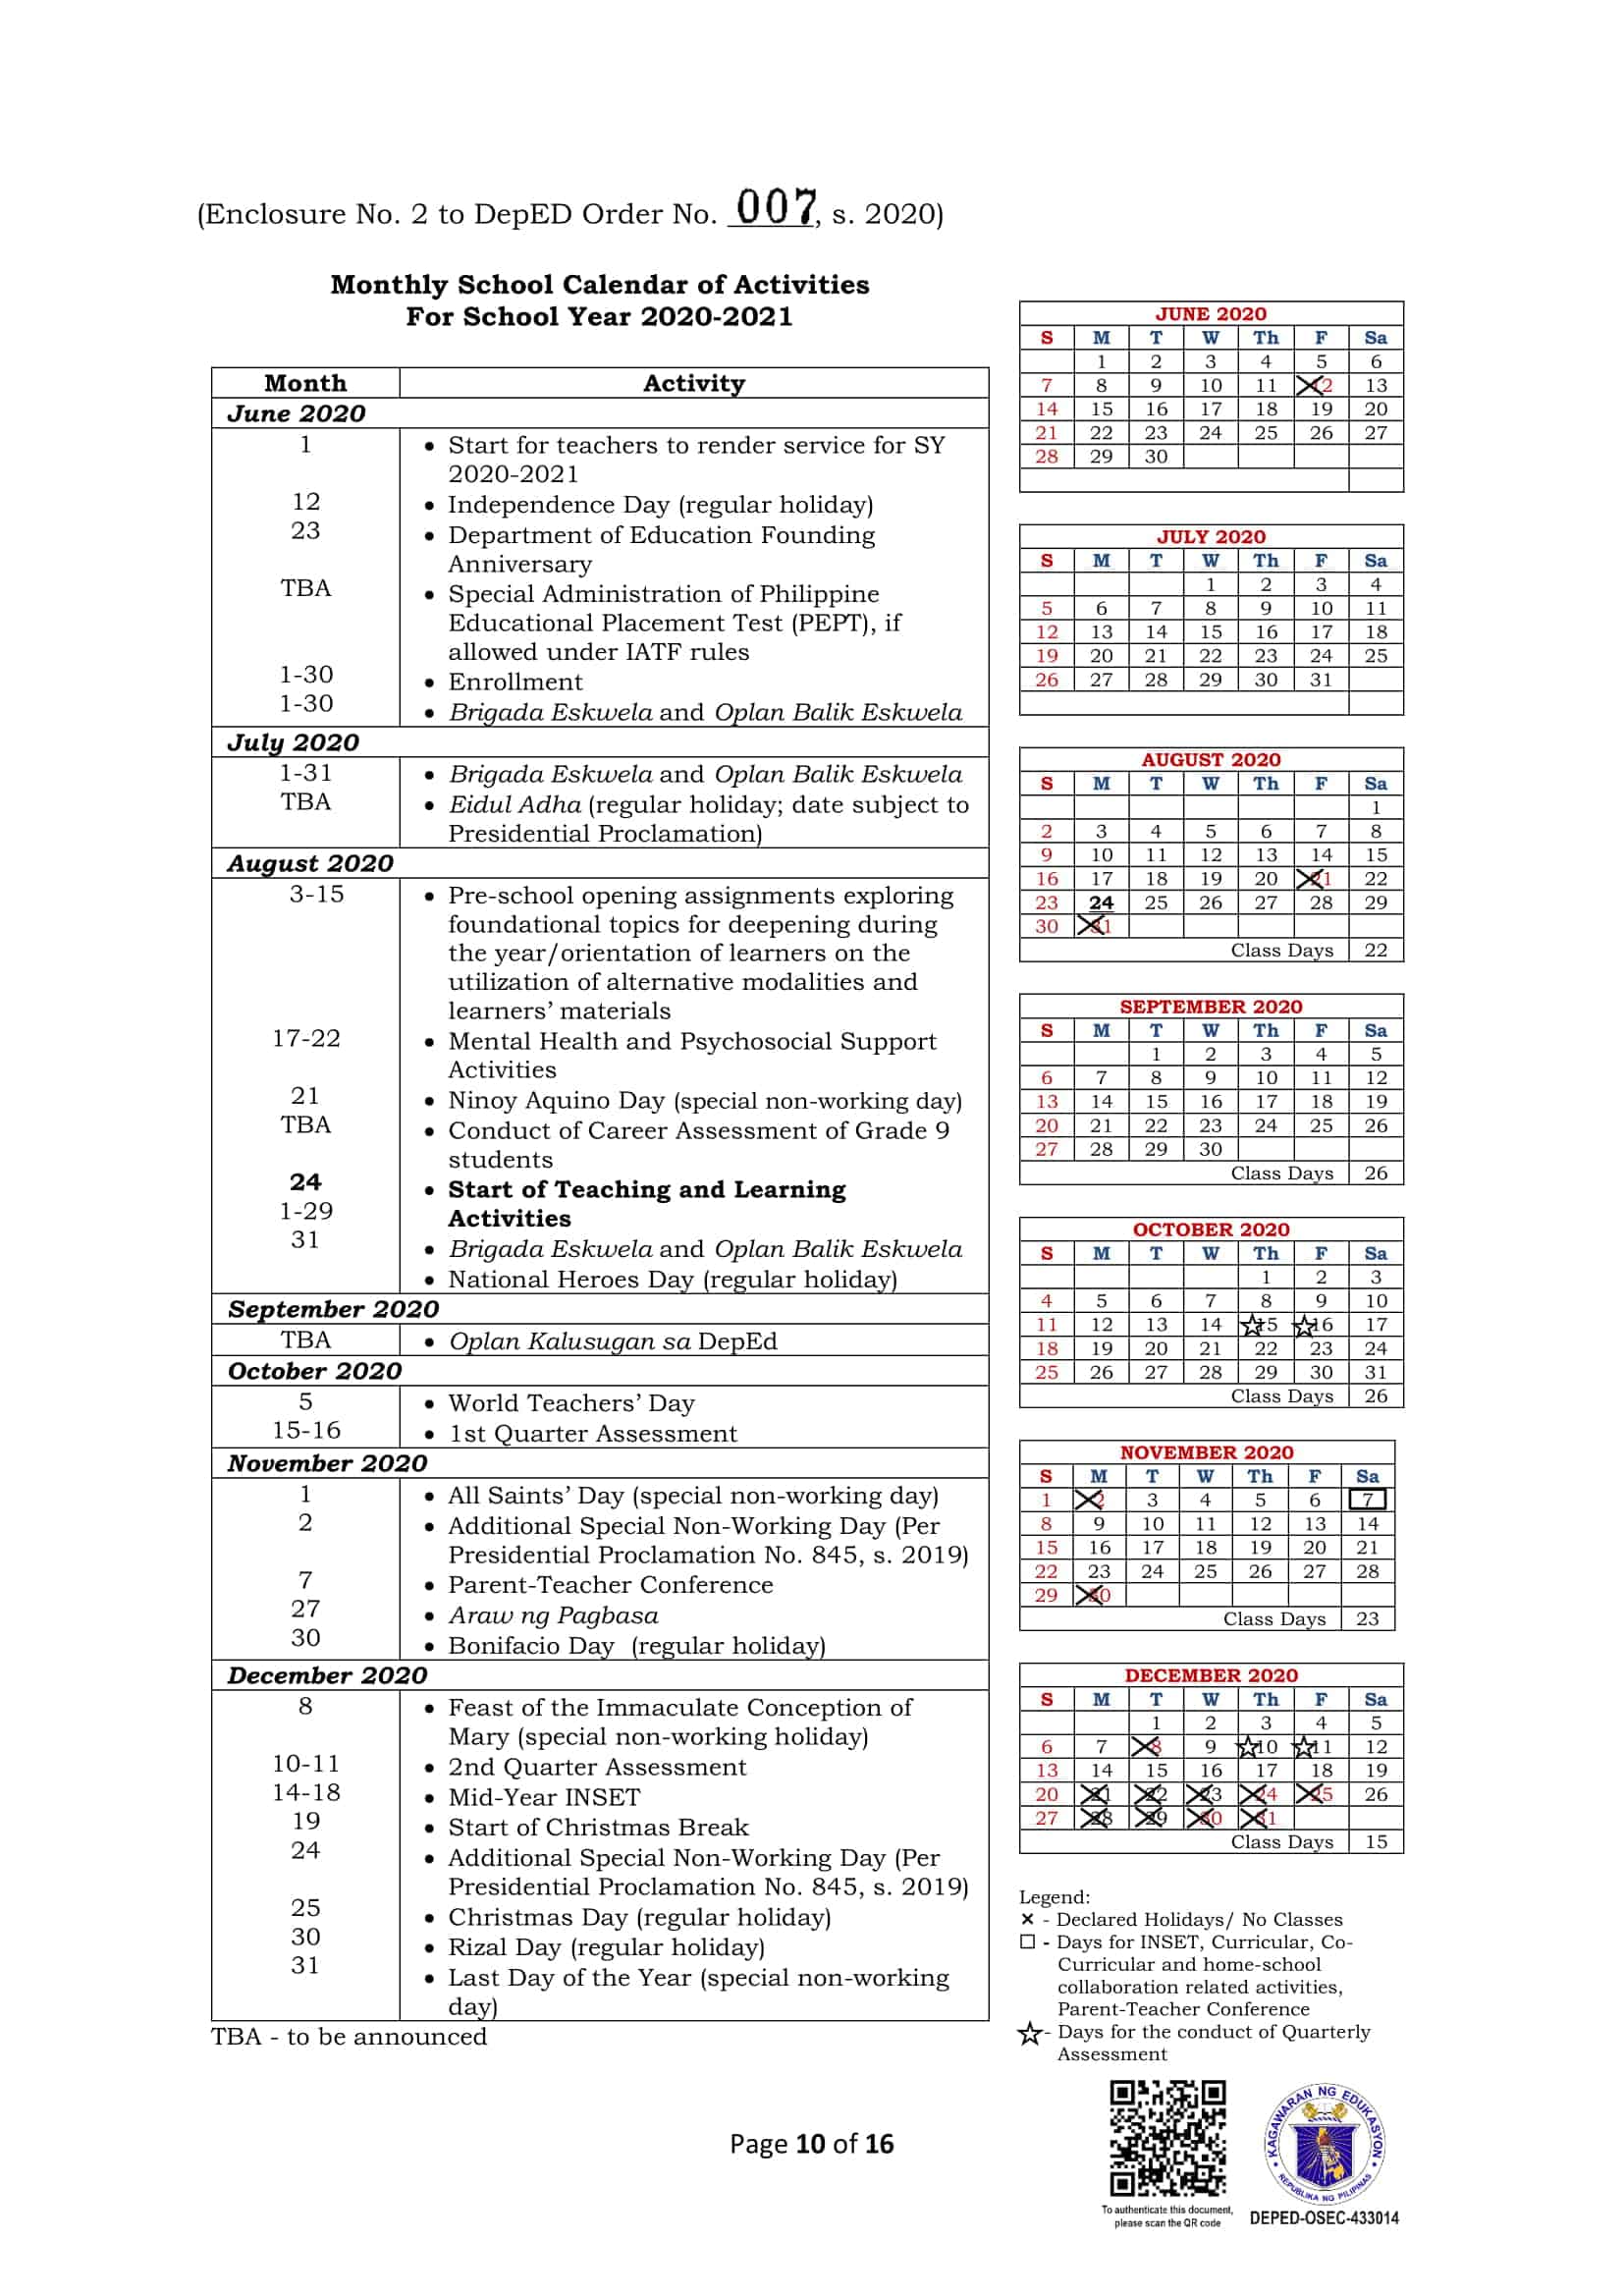 deped-monthly-school-calendar-of-activities-for-school-year-2020-2021-let-reviewer-philippines